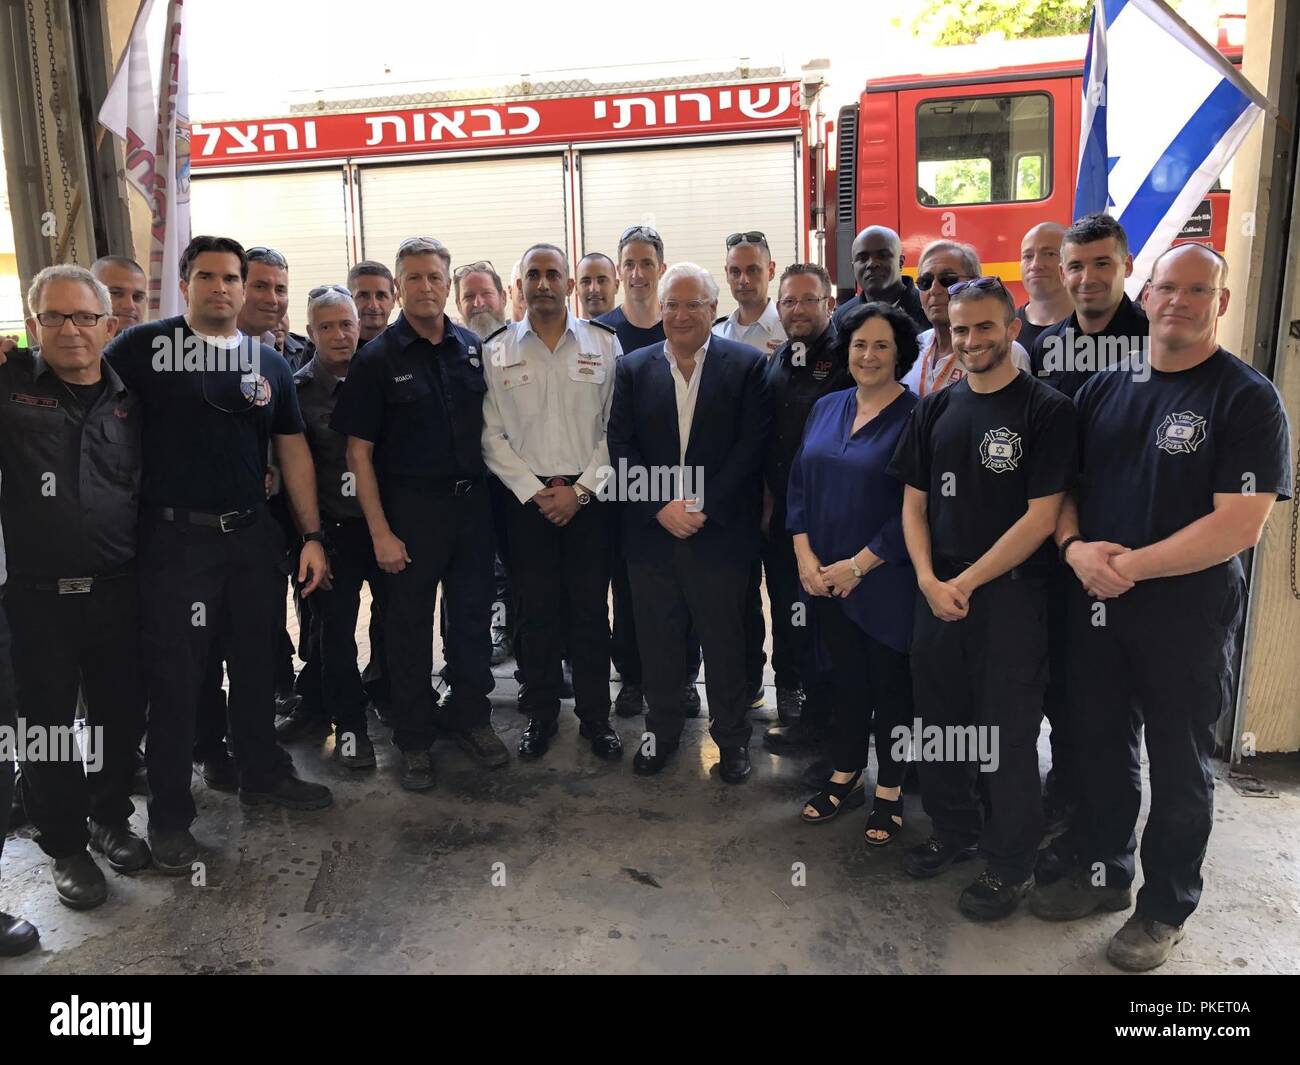 U.S. Ambassador to Israel, David Friedman, visited Sderot's fire station today, August 1, 2018 where he met with firefighters who are working to extinguish the fires on the border along the Gaza Strip, including 10 American firefighters. The American firefighters, who volunteer through the Emergency Volunteers Project (EVP) organization came to Israel from the U.S to help their Israeli counterparts fight fires caused by incendiary kites and balloons launched from Gaza towards Israel. Israel’s Fire and Rescue Commissioner Dedi Simhi also came to thank the firefighters.    The Ambassador thanked Stock Photo